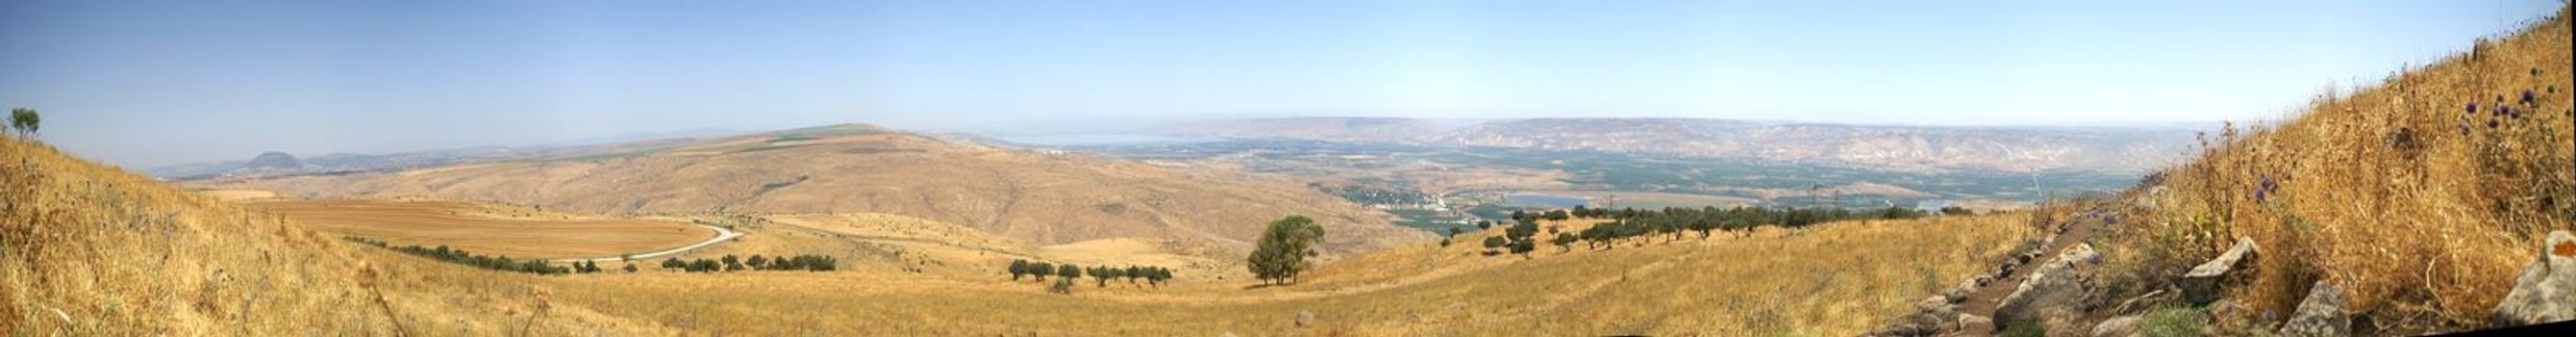 Mountains and nature in Galilee, Israel - travel vacation in  Middle East